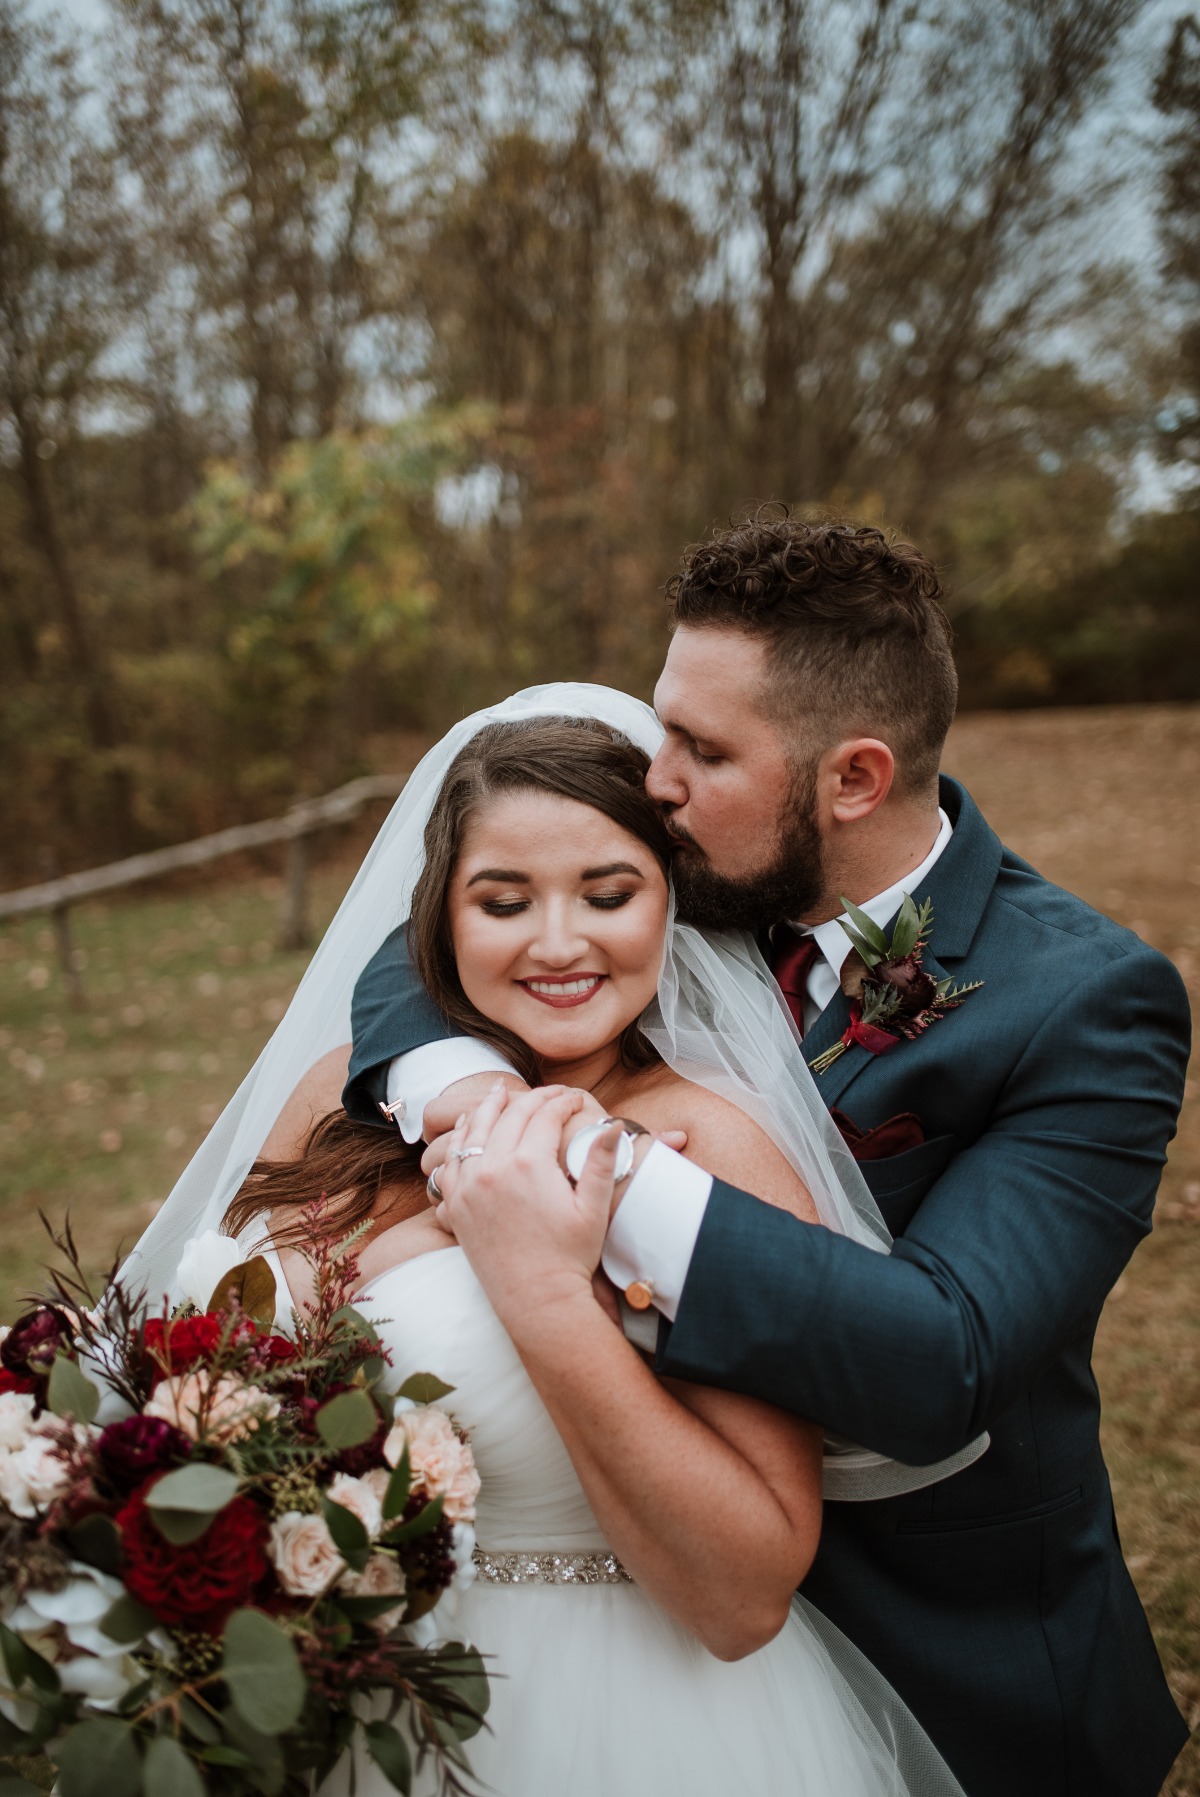 Perfect Fall Wedding With Sentimental Touches